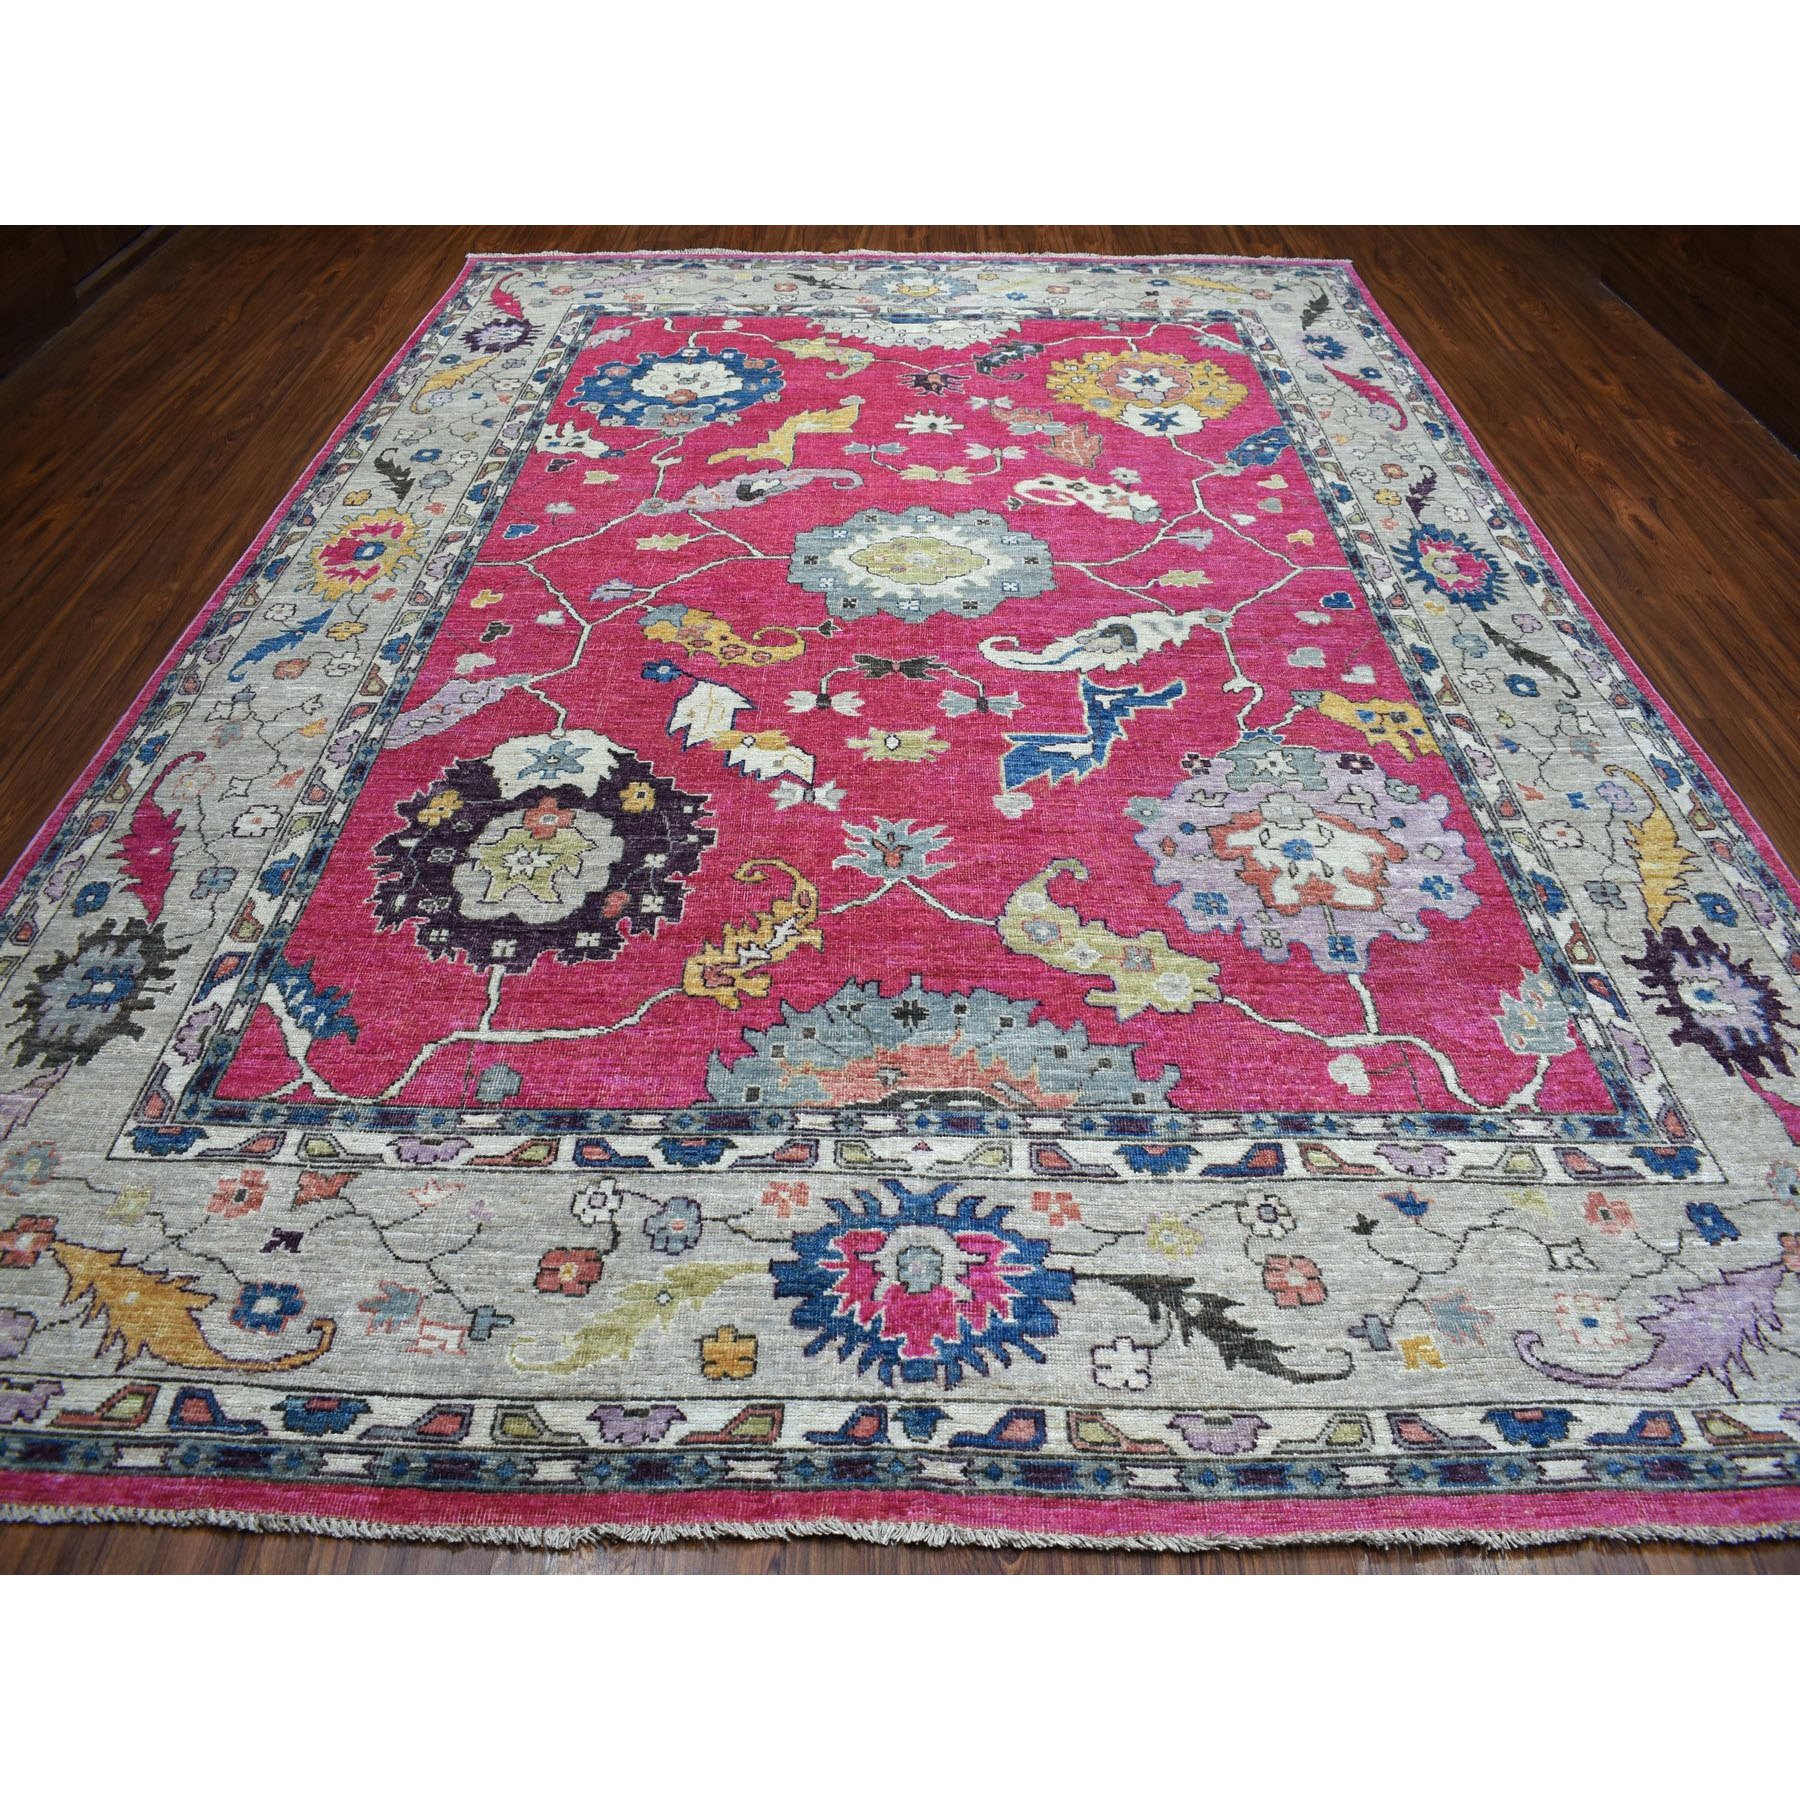 9-9 x13-2  Hot Pink Angora Oushak Soft Velvety Wool Hand Knotted Oriental Rug 